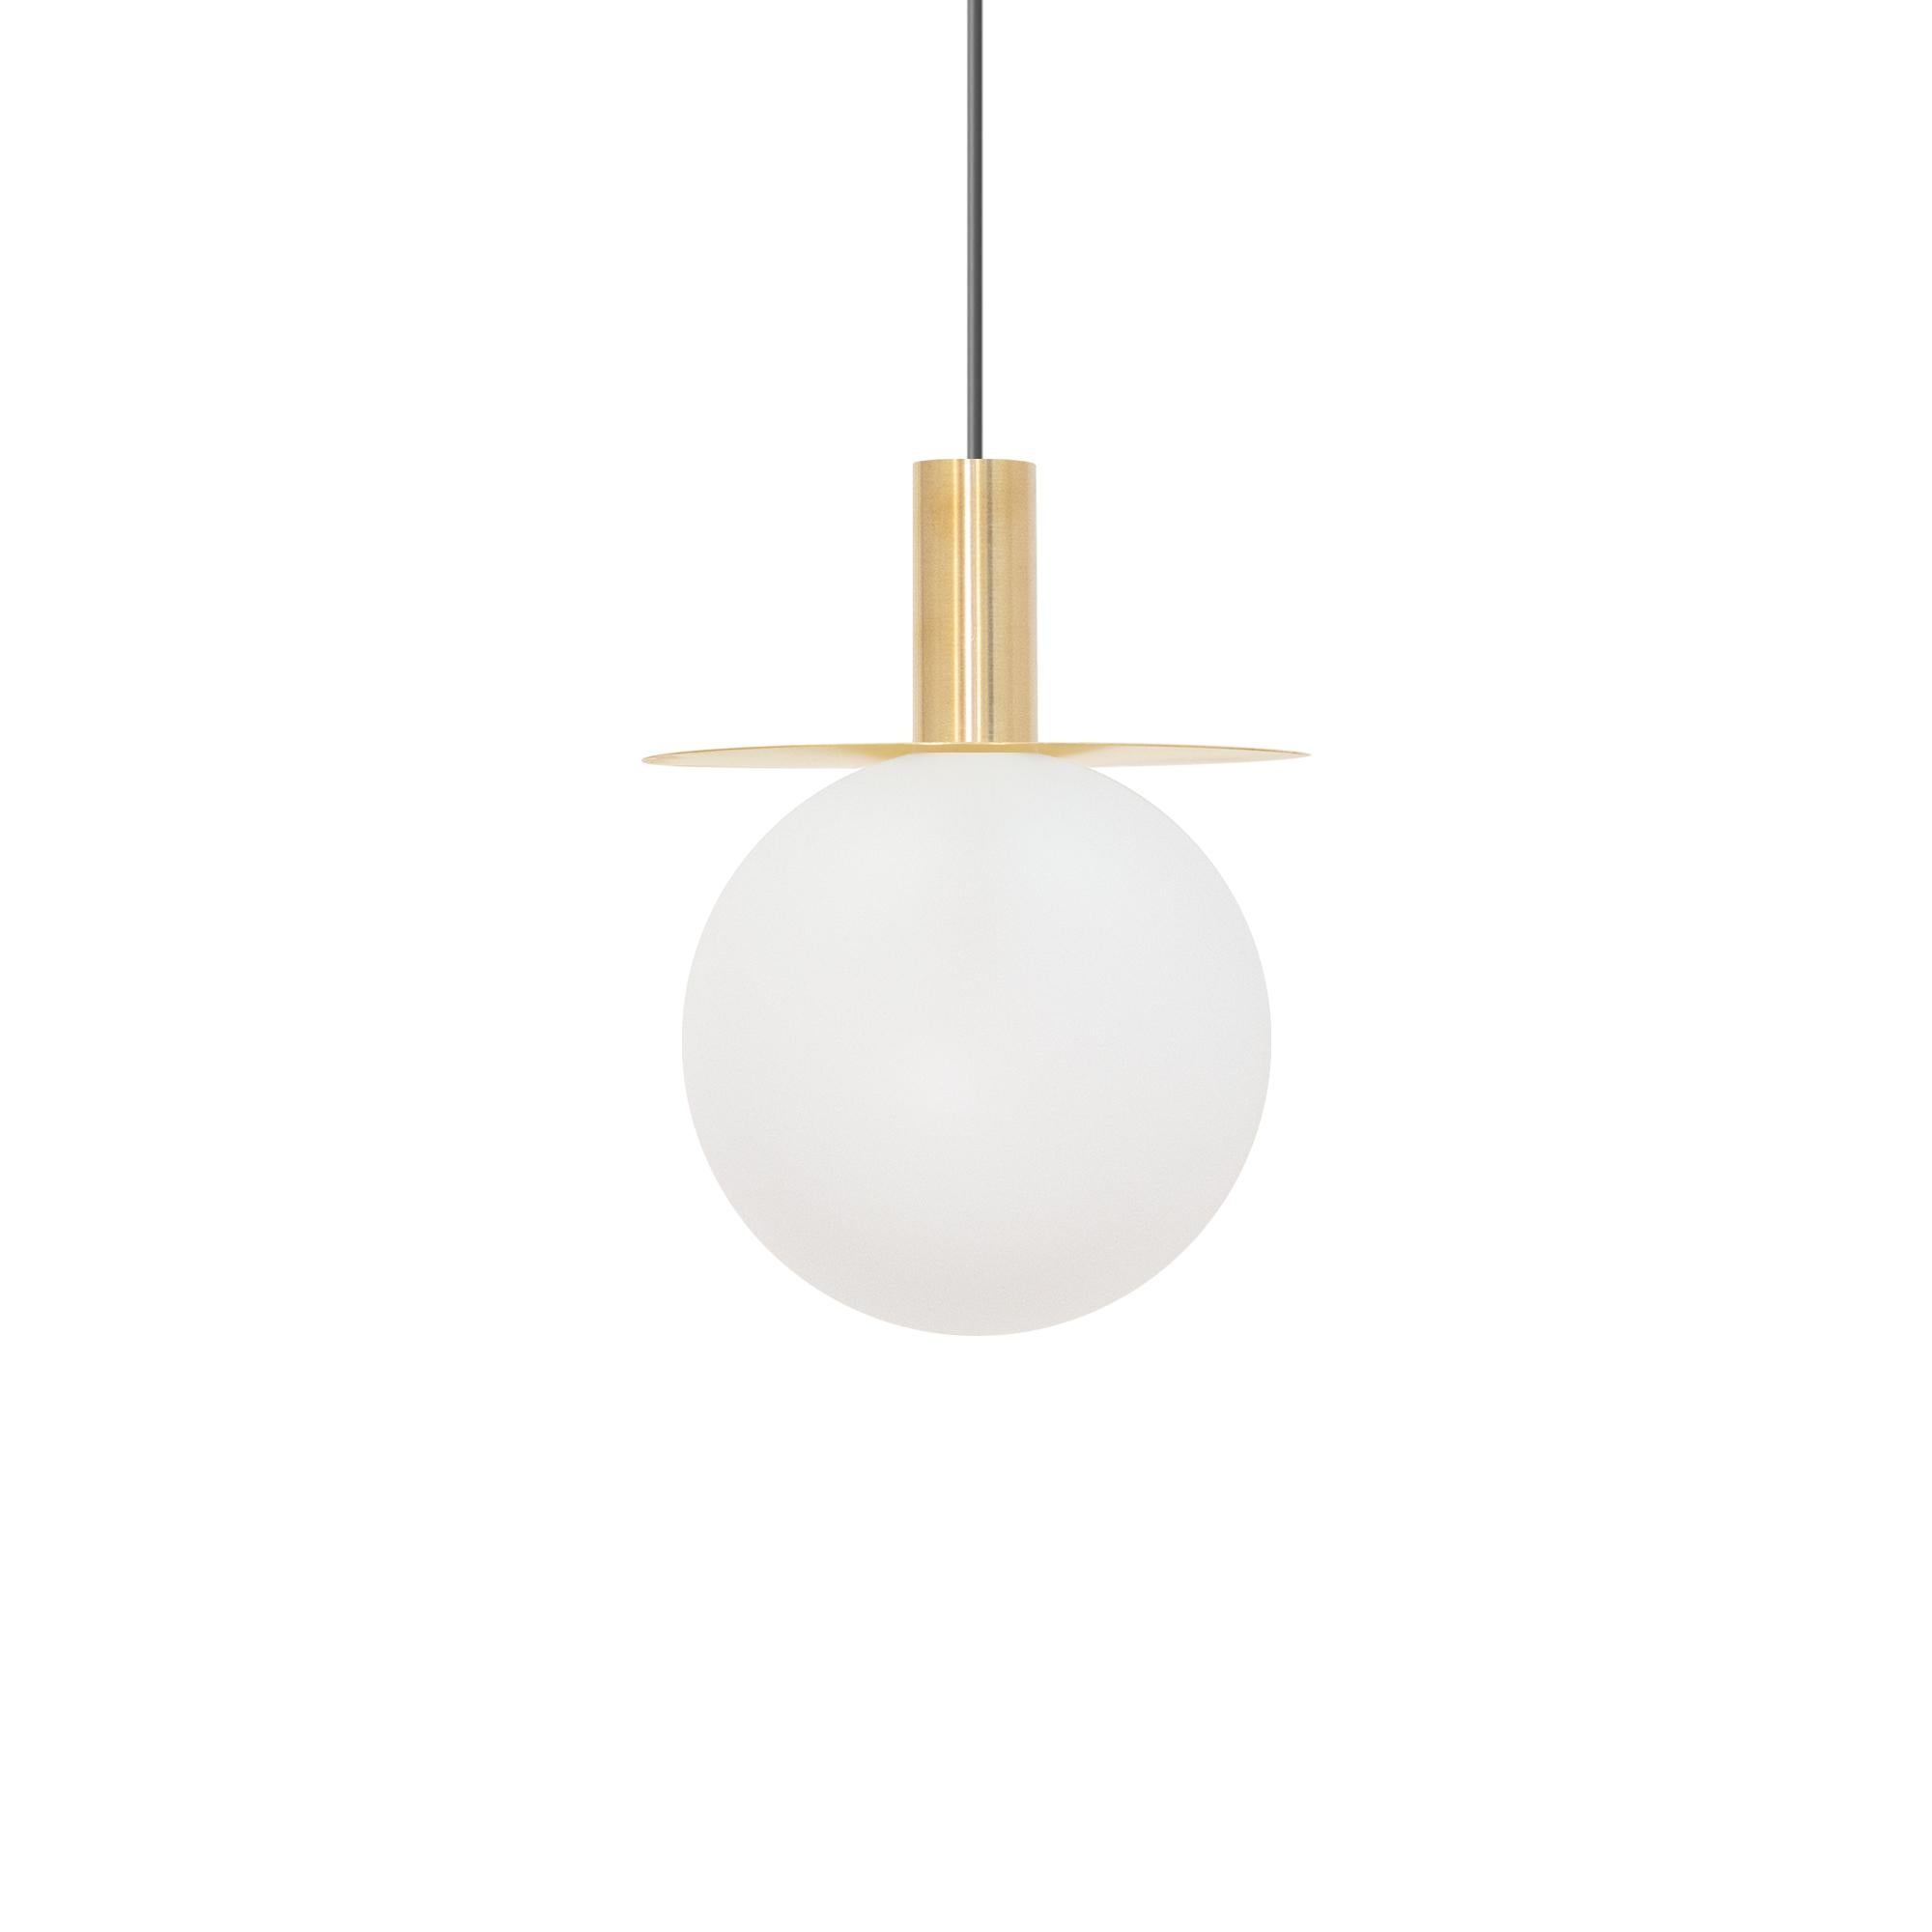 Copper disc big light by Atris
Materials: copper, satin glass
Also available in steel and brass.
Dimensions: H 22 x D 21 cm
Also available in D 14 cm.

We are the preachers of honest design, and we like to emphasize the beauty of natural